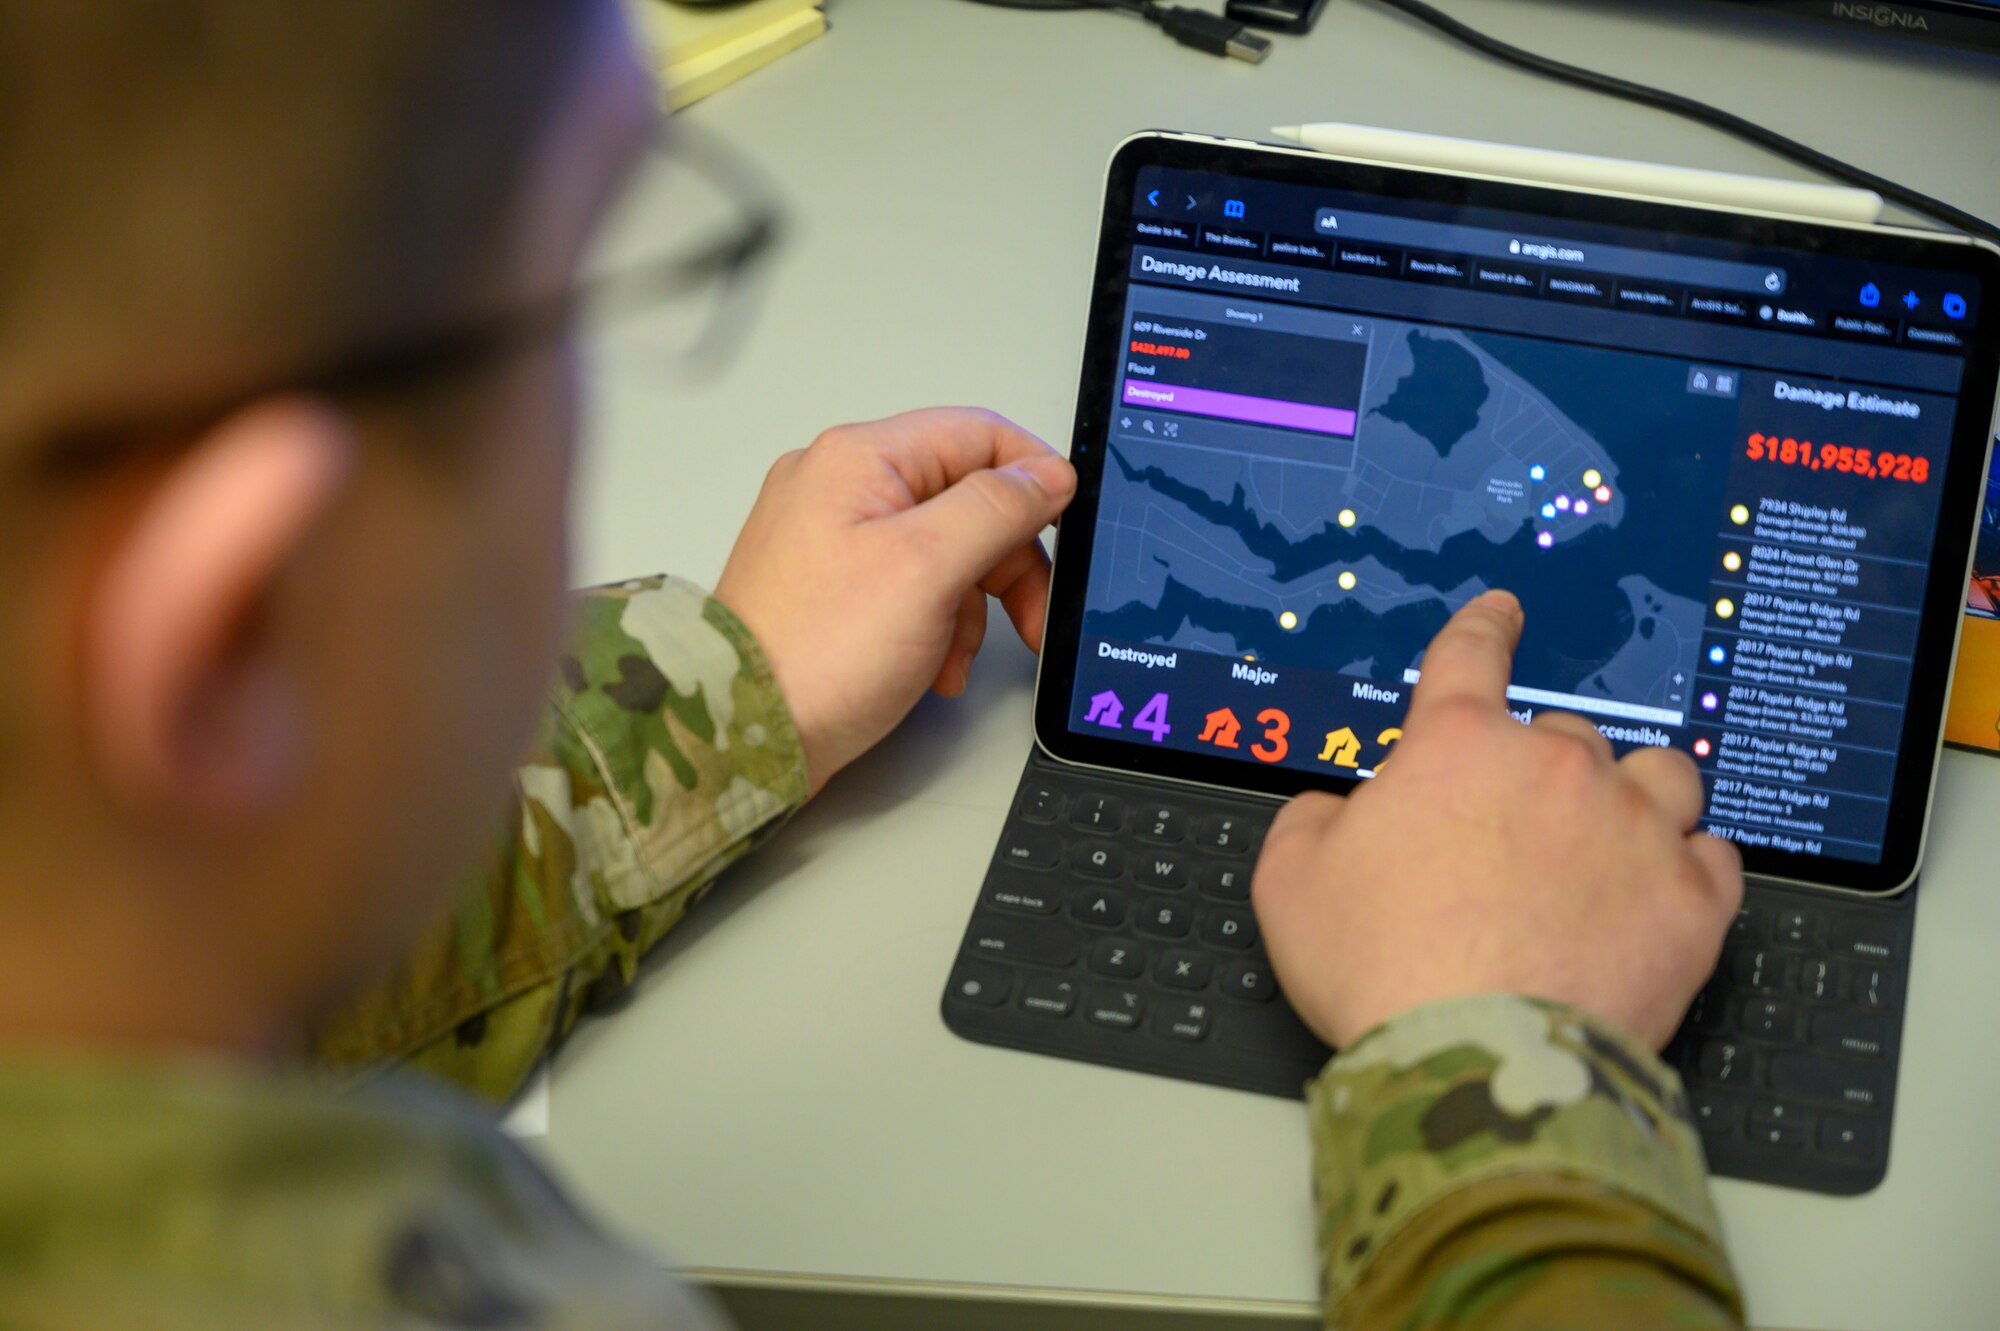 U.S. Air Force Master Sgt. Brandon Louderback, a 188th CES engineer assistant, Arkansas Air National Guard, demonstrates Geographic Information System (GIS) surveying capabilities during a training exercise March 4, 2020, at Ebbing Air National Guard base, Fort Smith, Ark. (U.S. Air National Guard photo by Staff Sgt. Matthew Matlock)